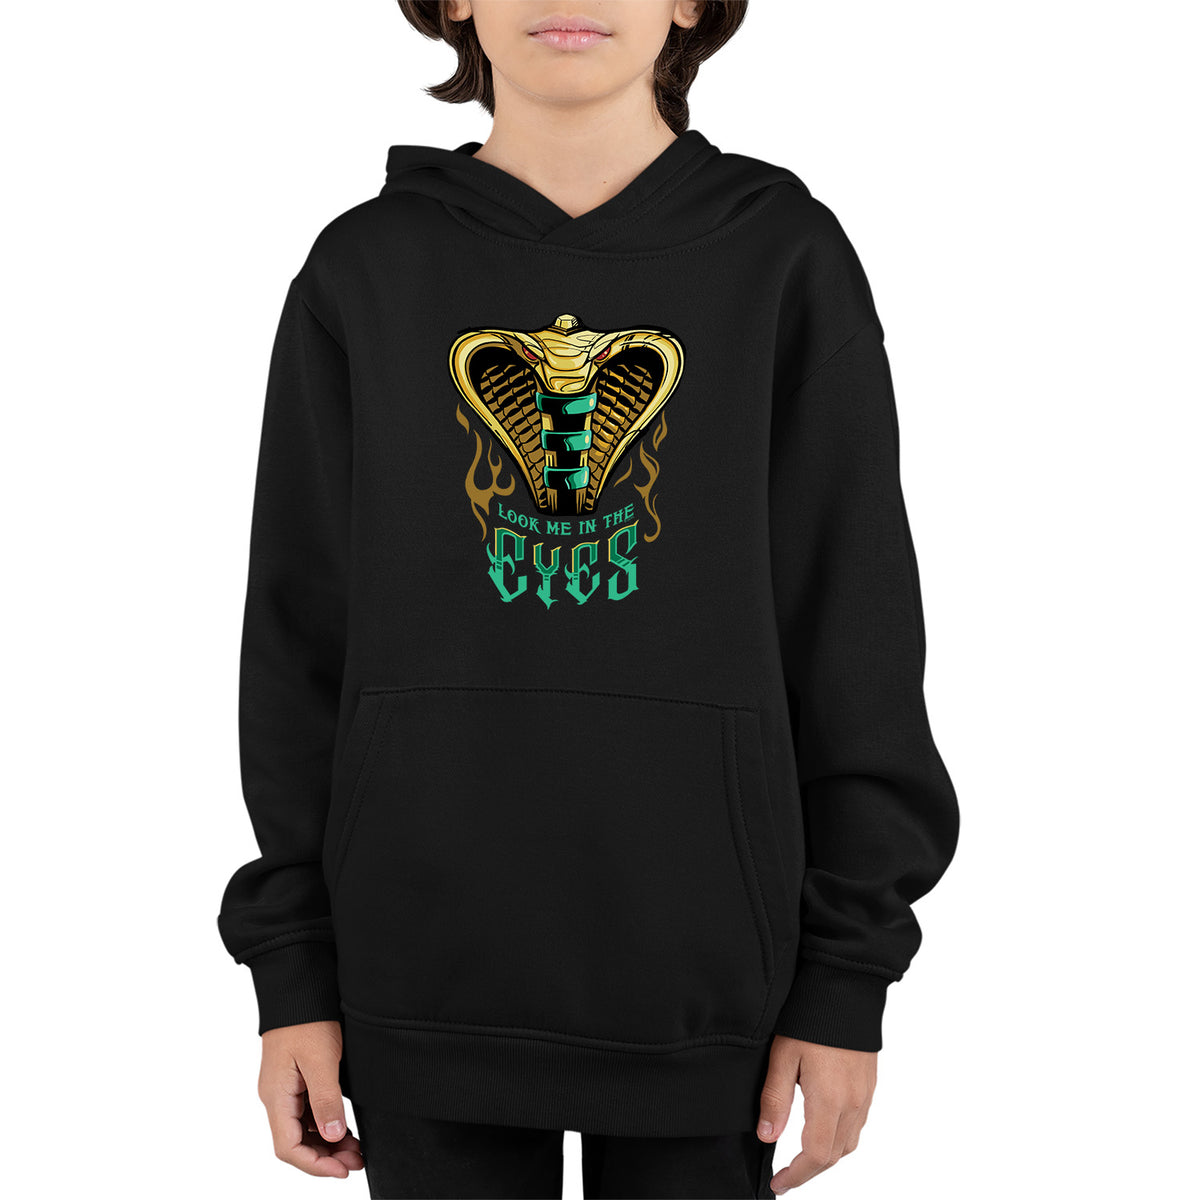 Aladdin Look Me In The Eyes | Disney Kids Pullover Hoodie Chroma Clothing